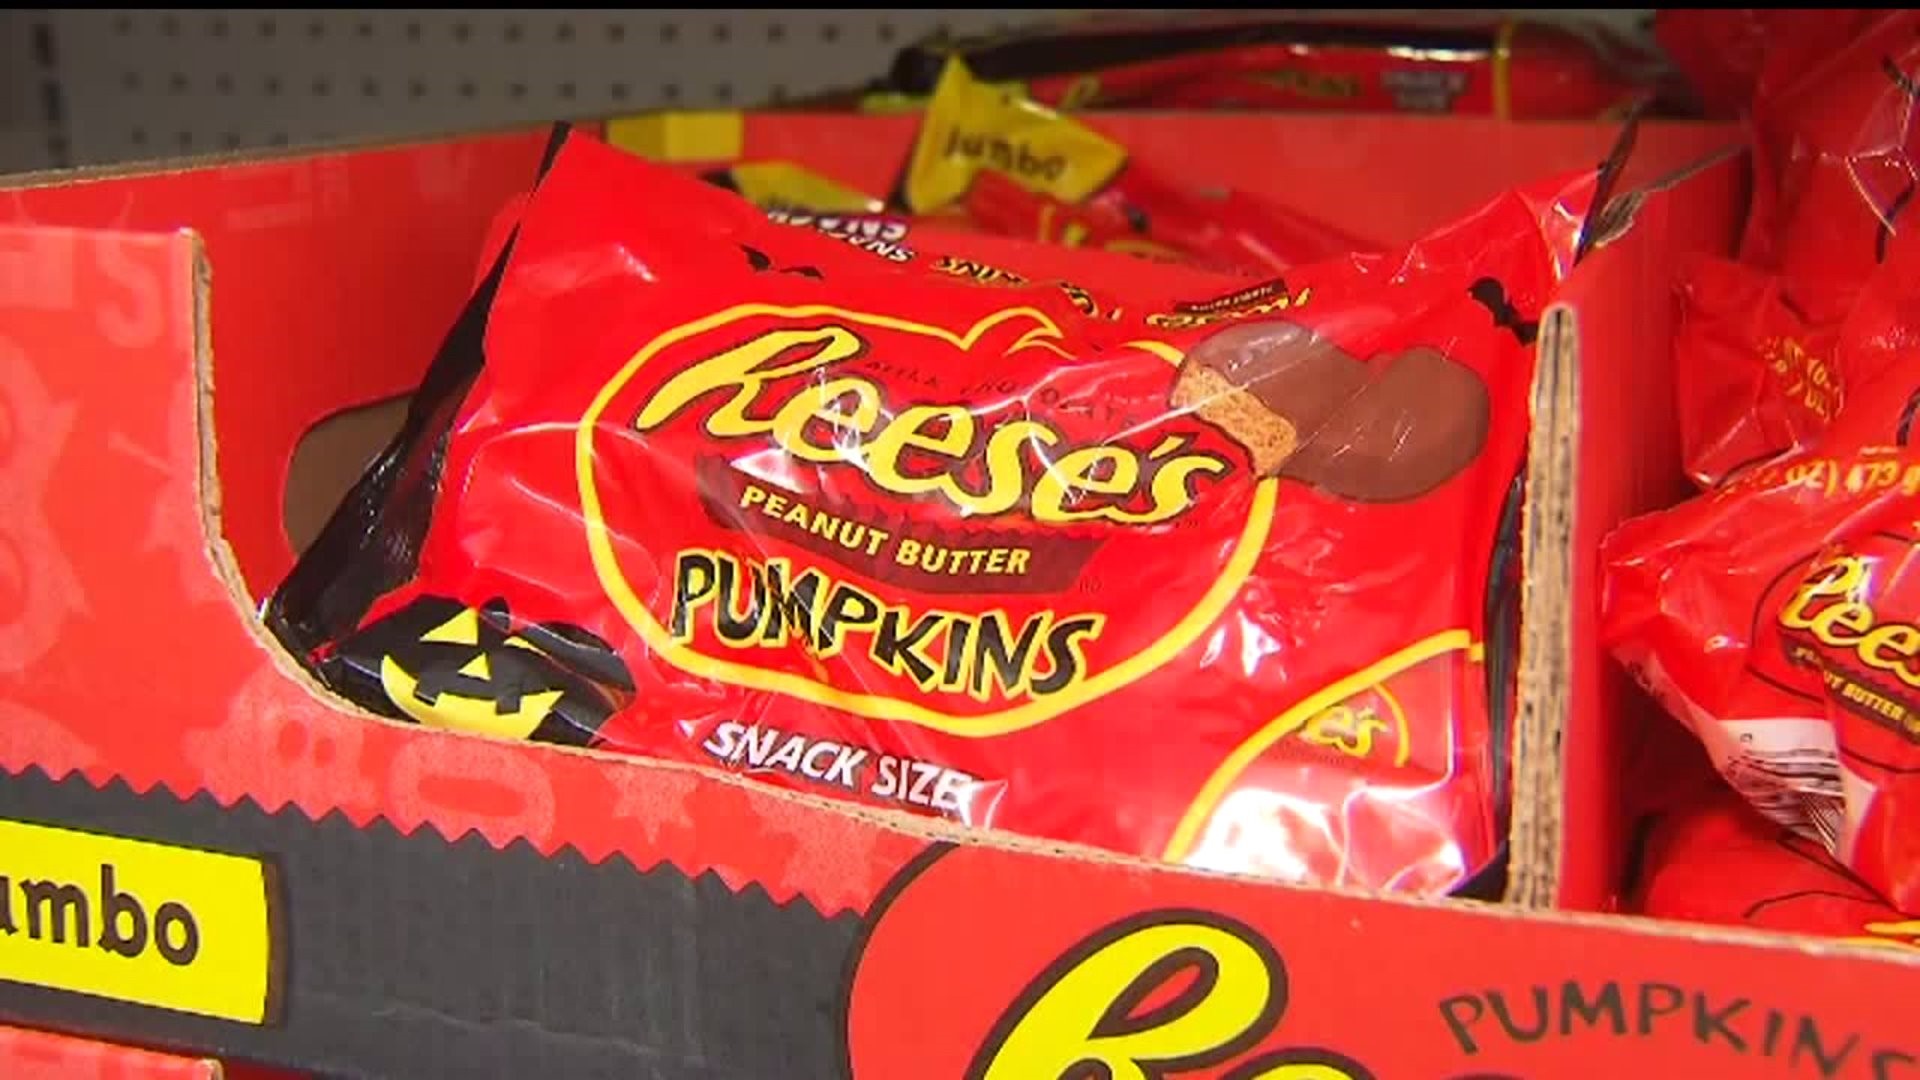 Reese`s Peanut Butter Cups are America`s favorite Halloween candy, new poll finds